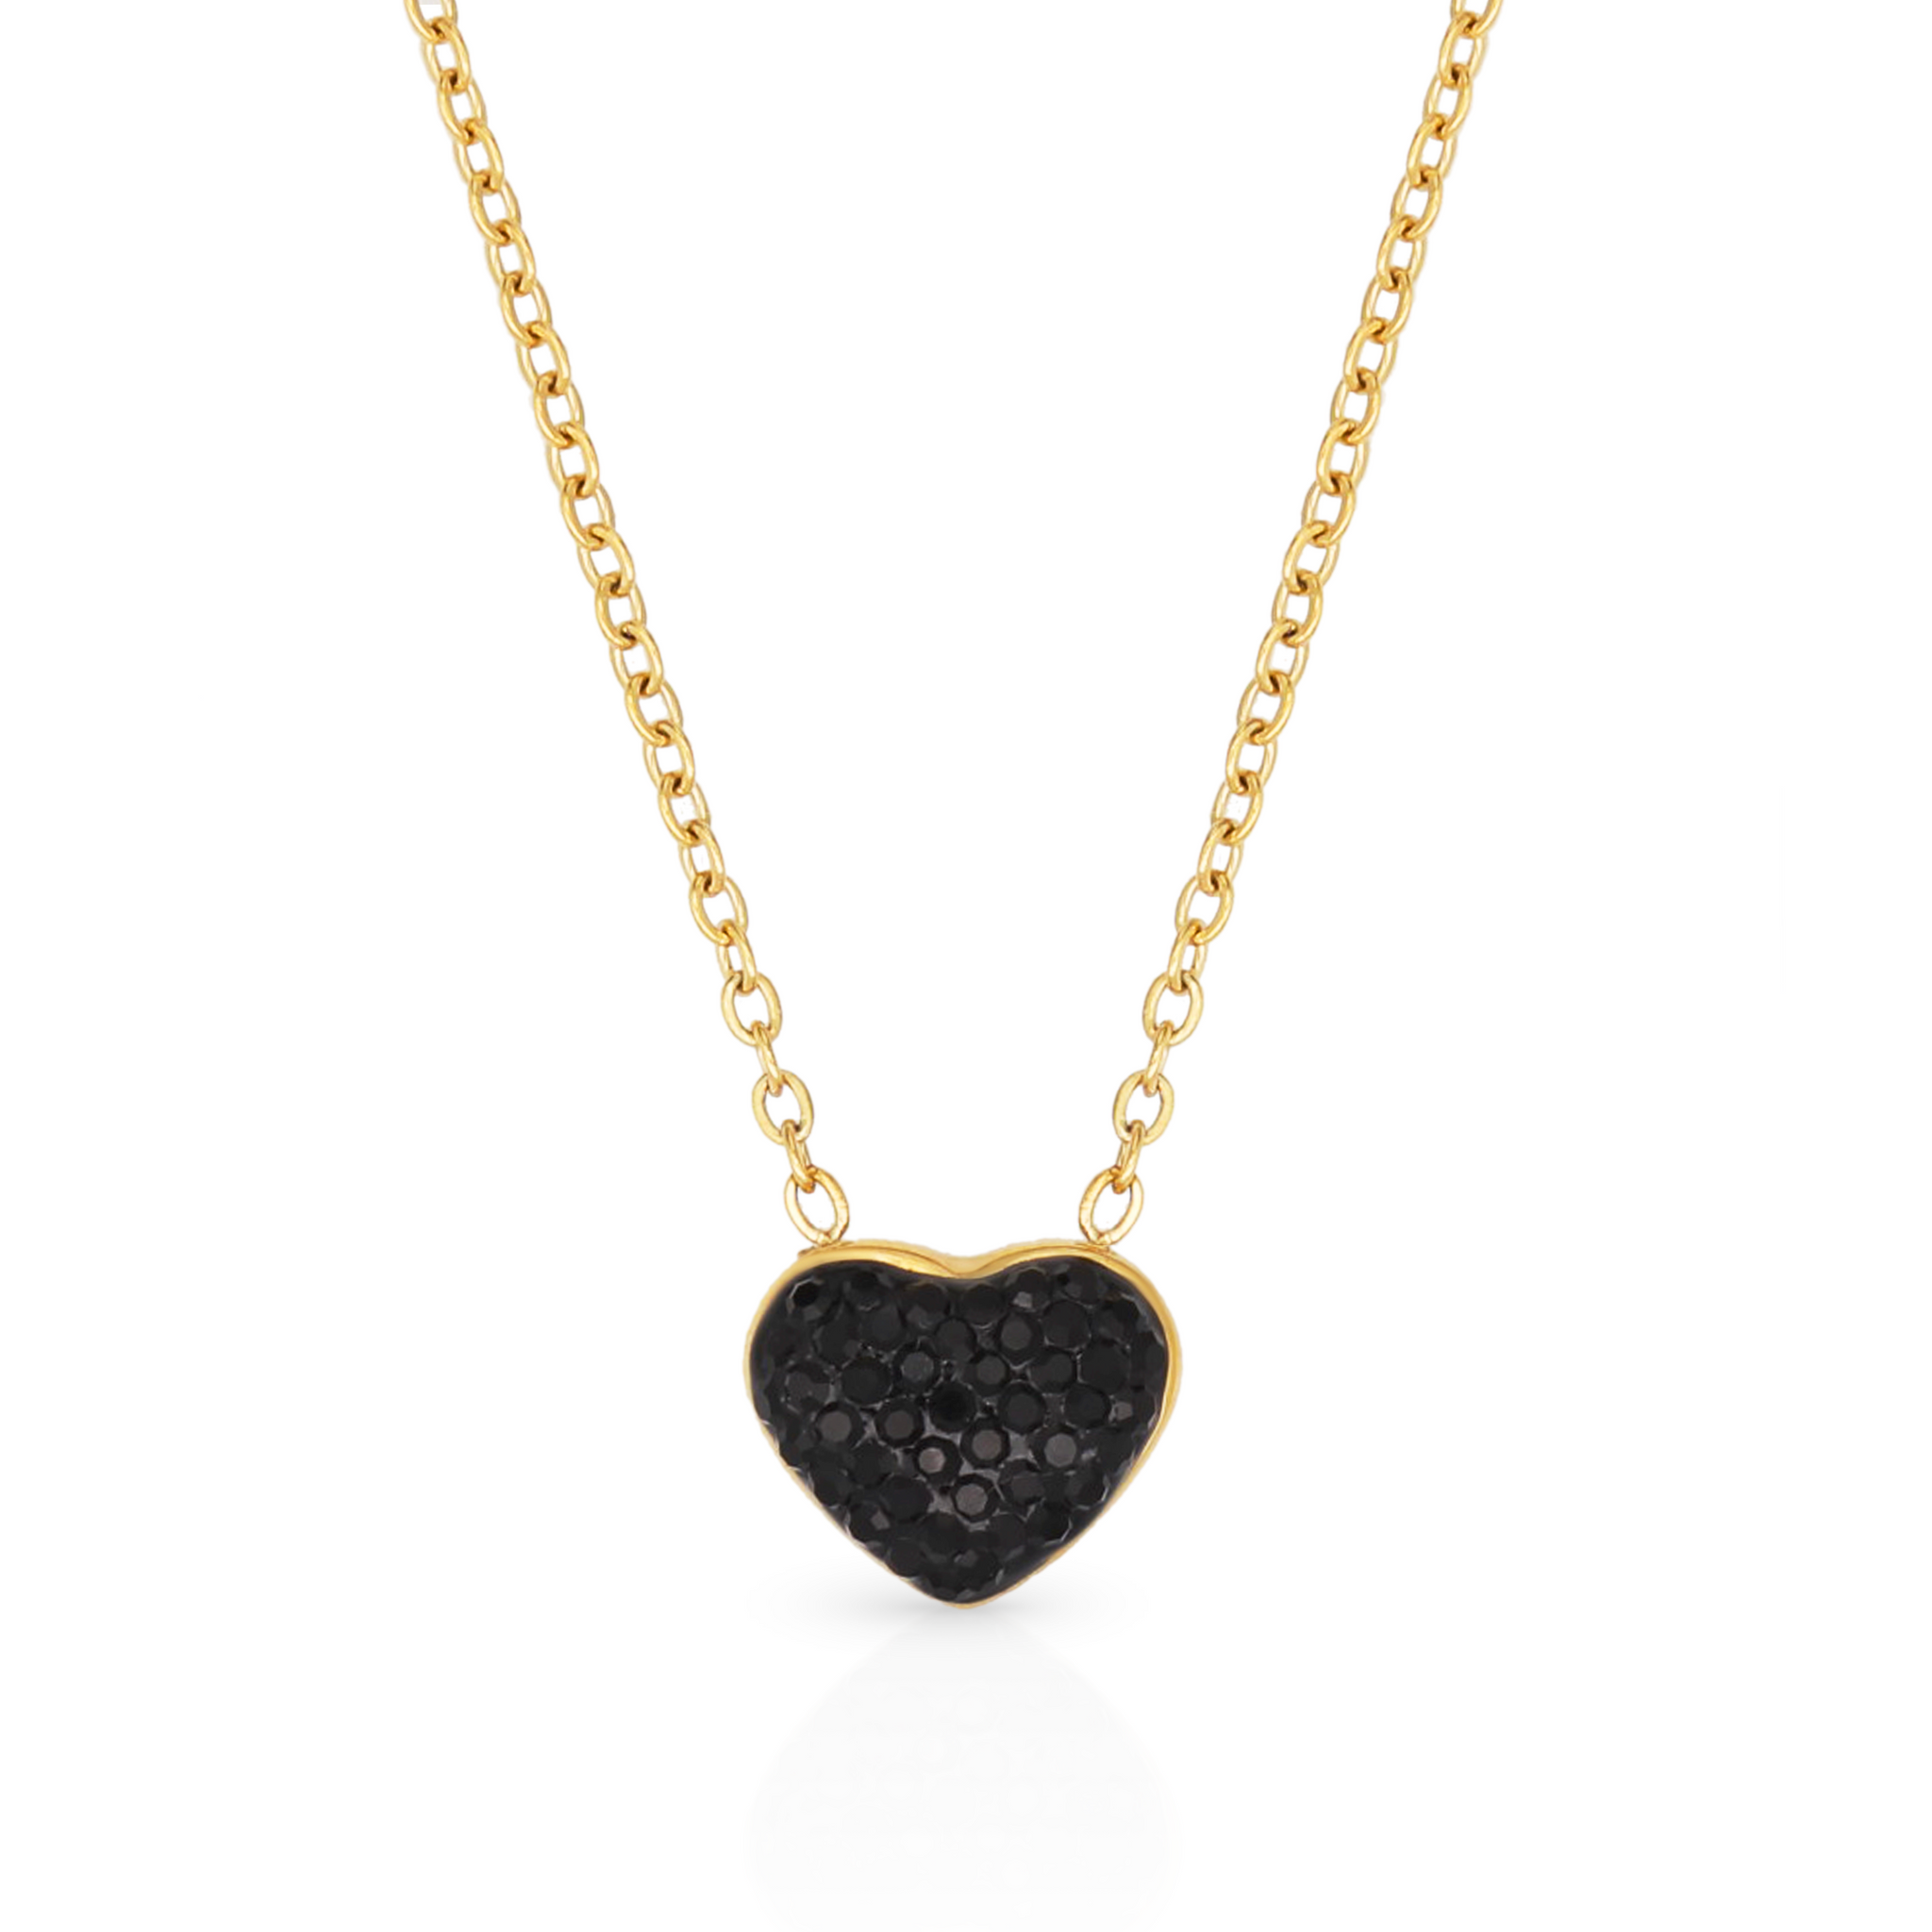 The Change of Heart Gold Necklace